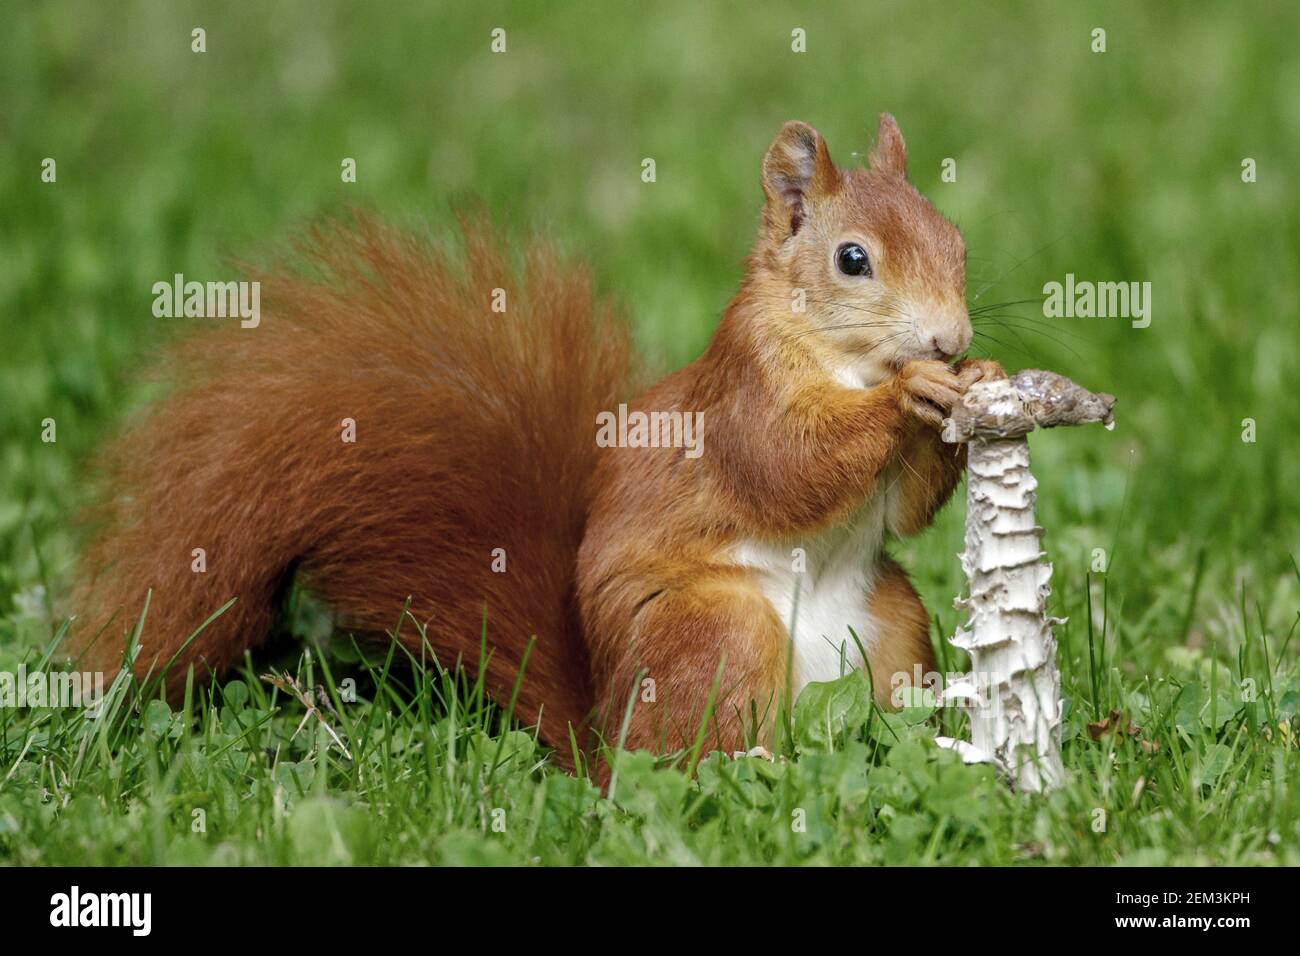 European red squirrel, Eurasian red squirrel (Sciurus vulgaris), sits in a meadow and eating a mushroom, side view, Germany, Baden-Wuerttemberg Stock Photo